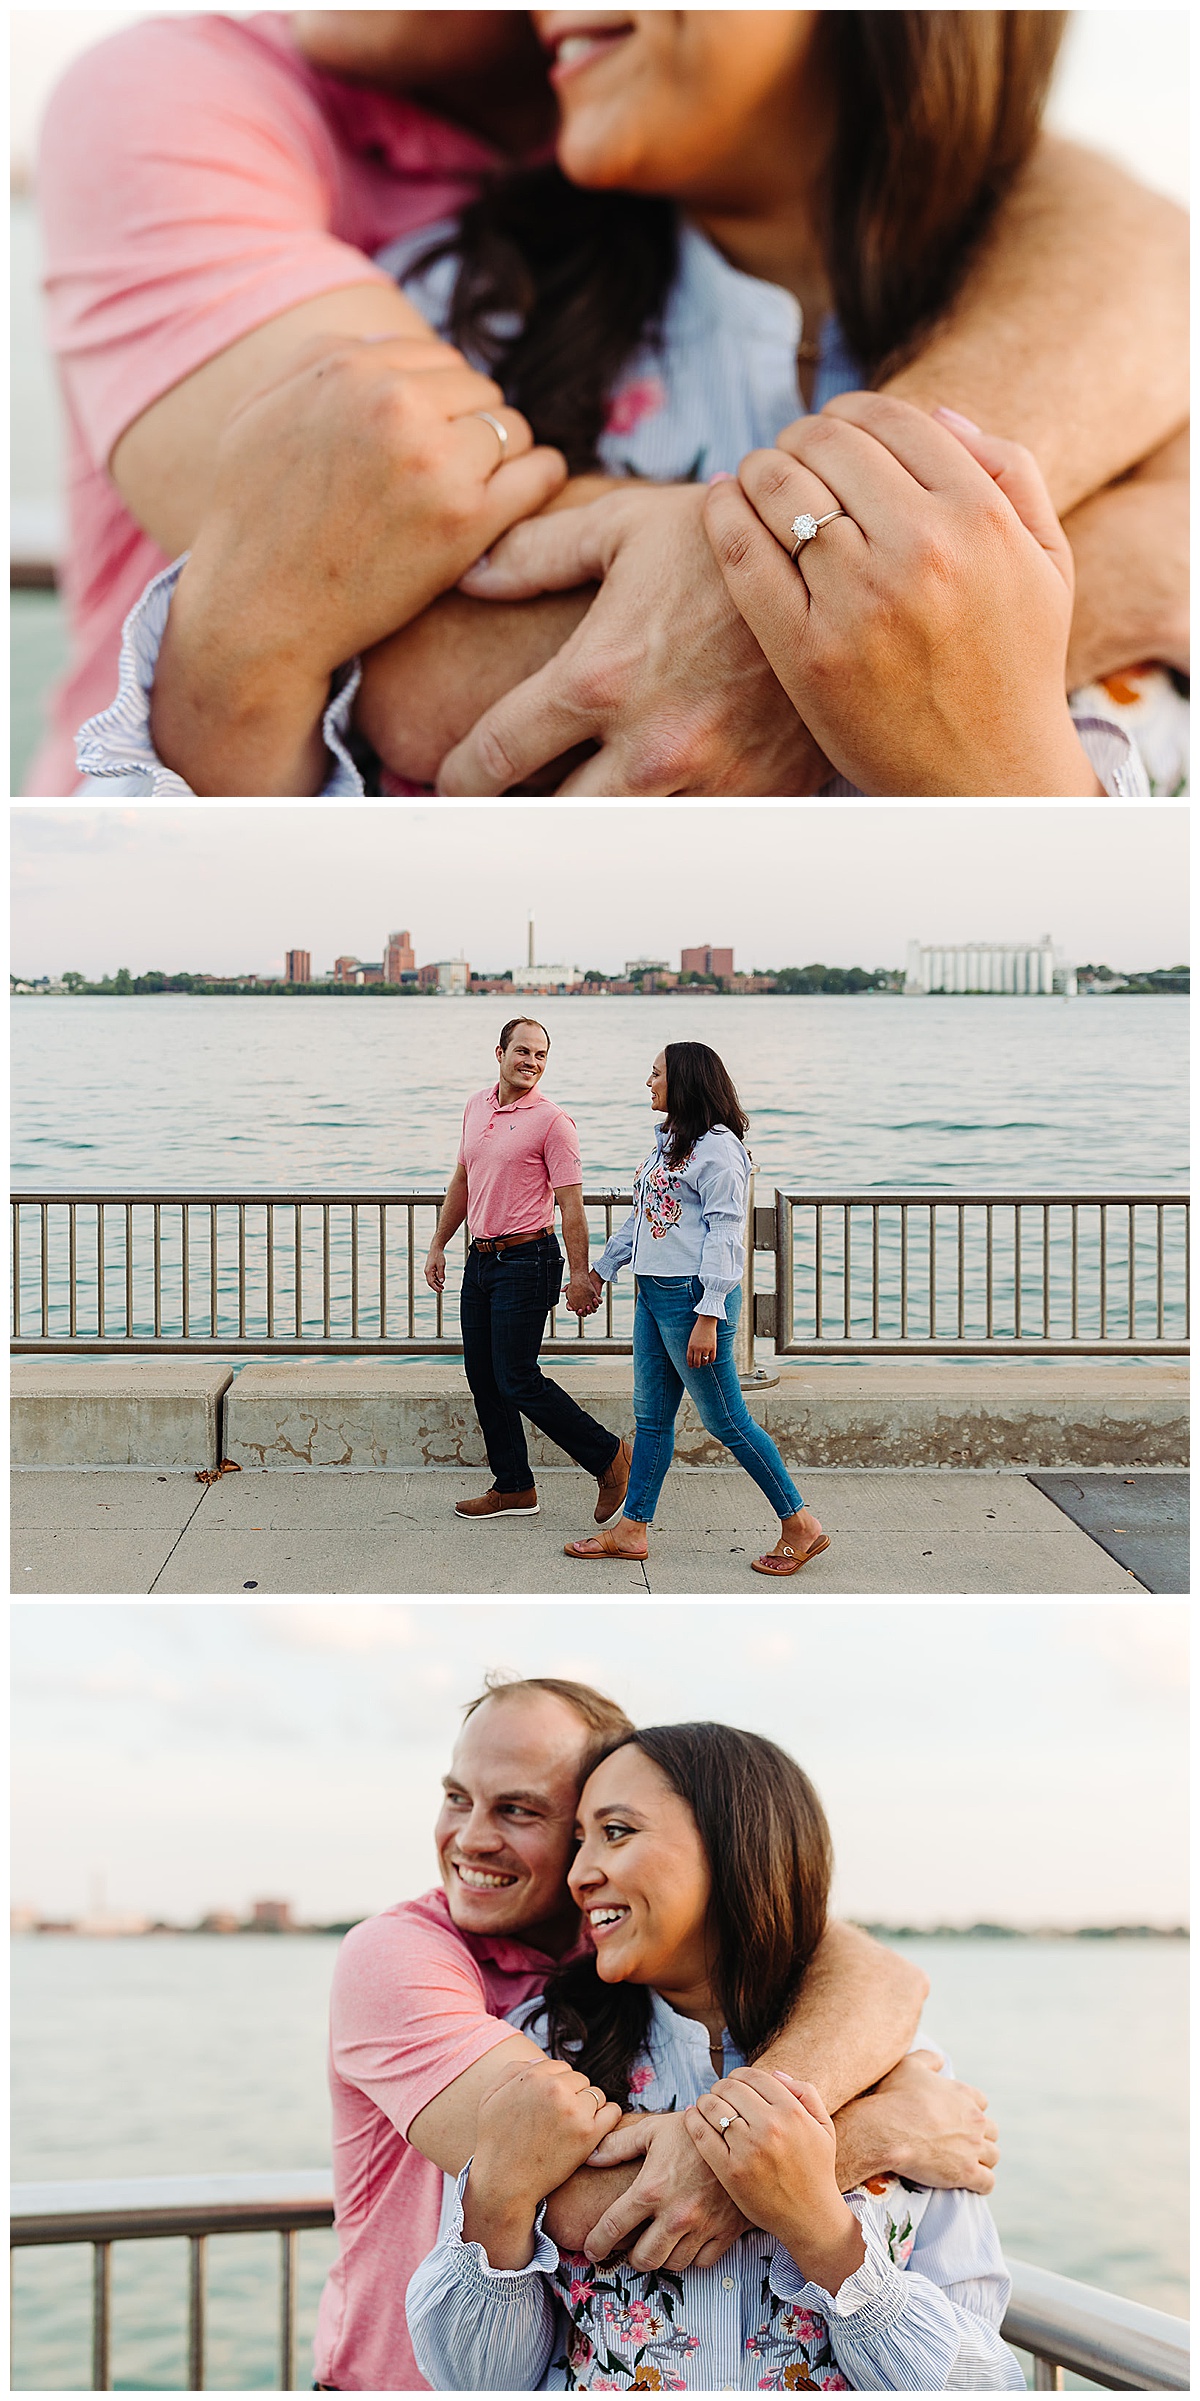 Beautiful couple laugh and smile together for Kayla Bouren Photography